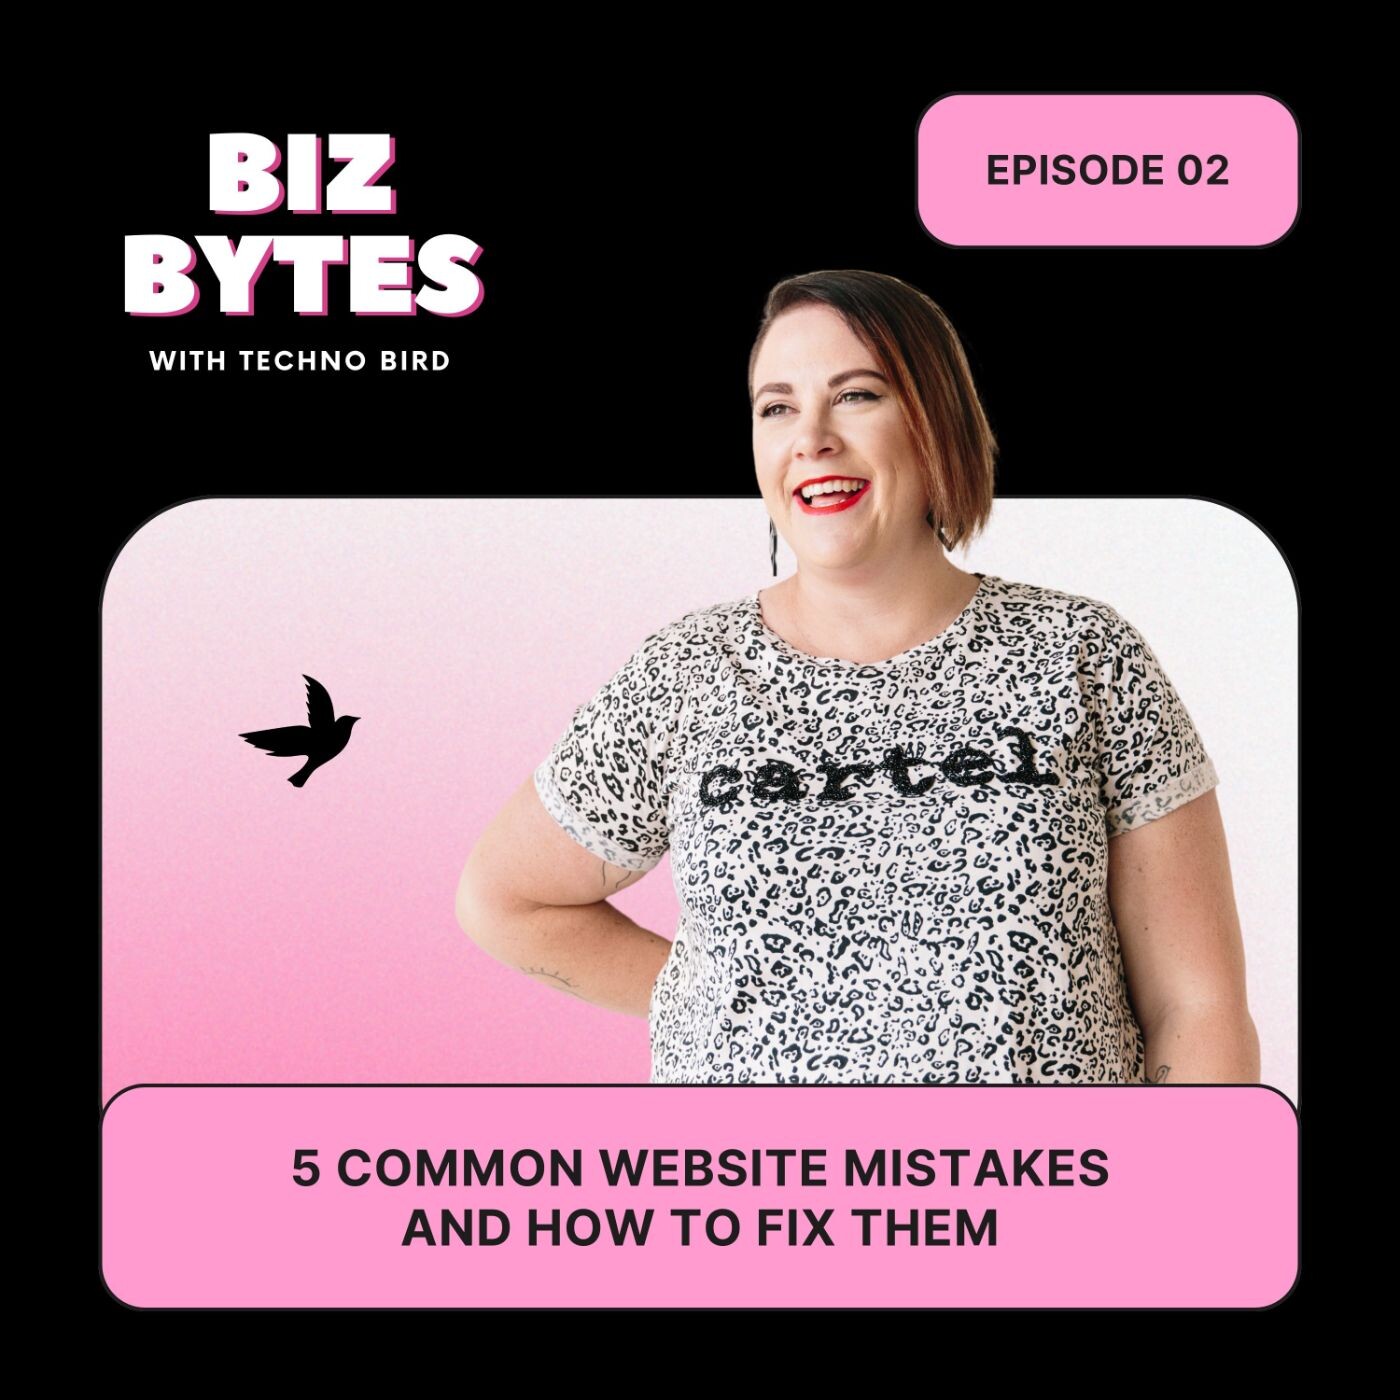 Episode 2 - 5 common website mistakes and how to fix them